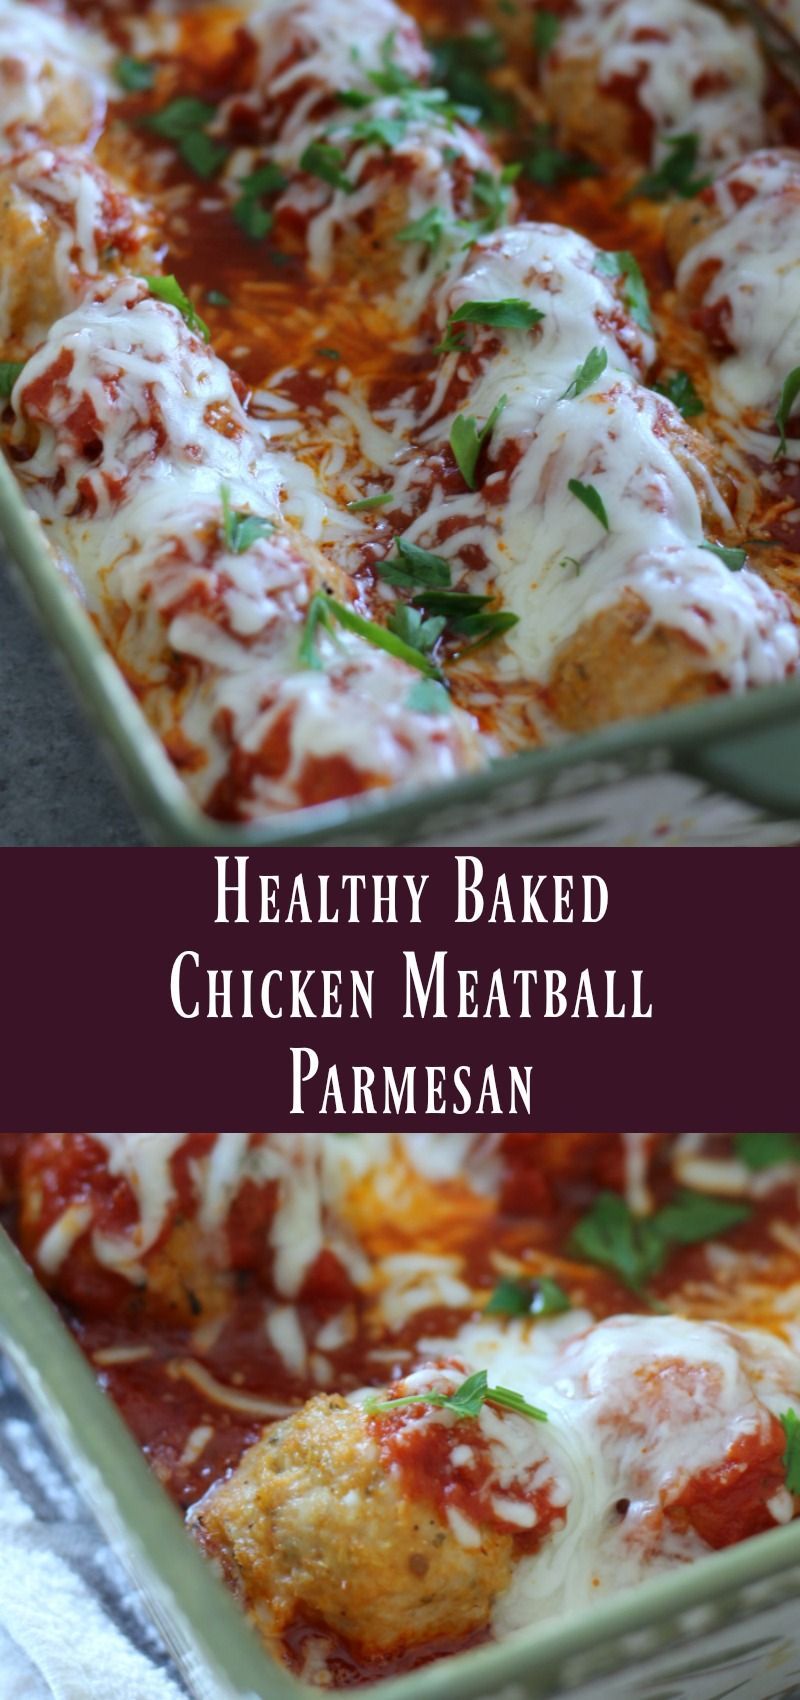 Healthy Baked Chicken Meatball Parmesan. Make-ahead ground chicken recipe to prepare on meal prep day.